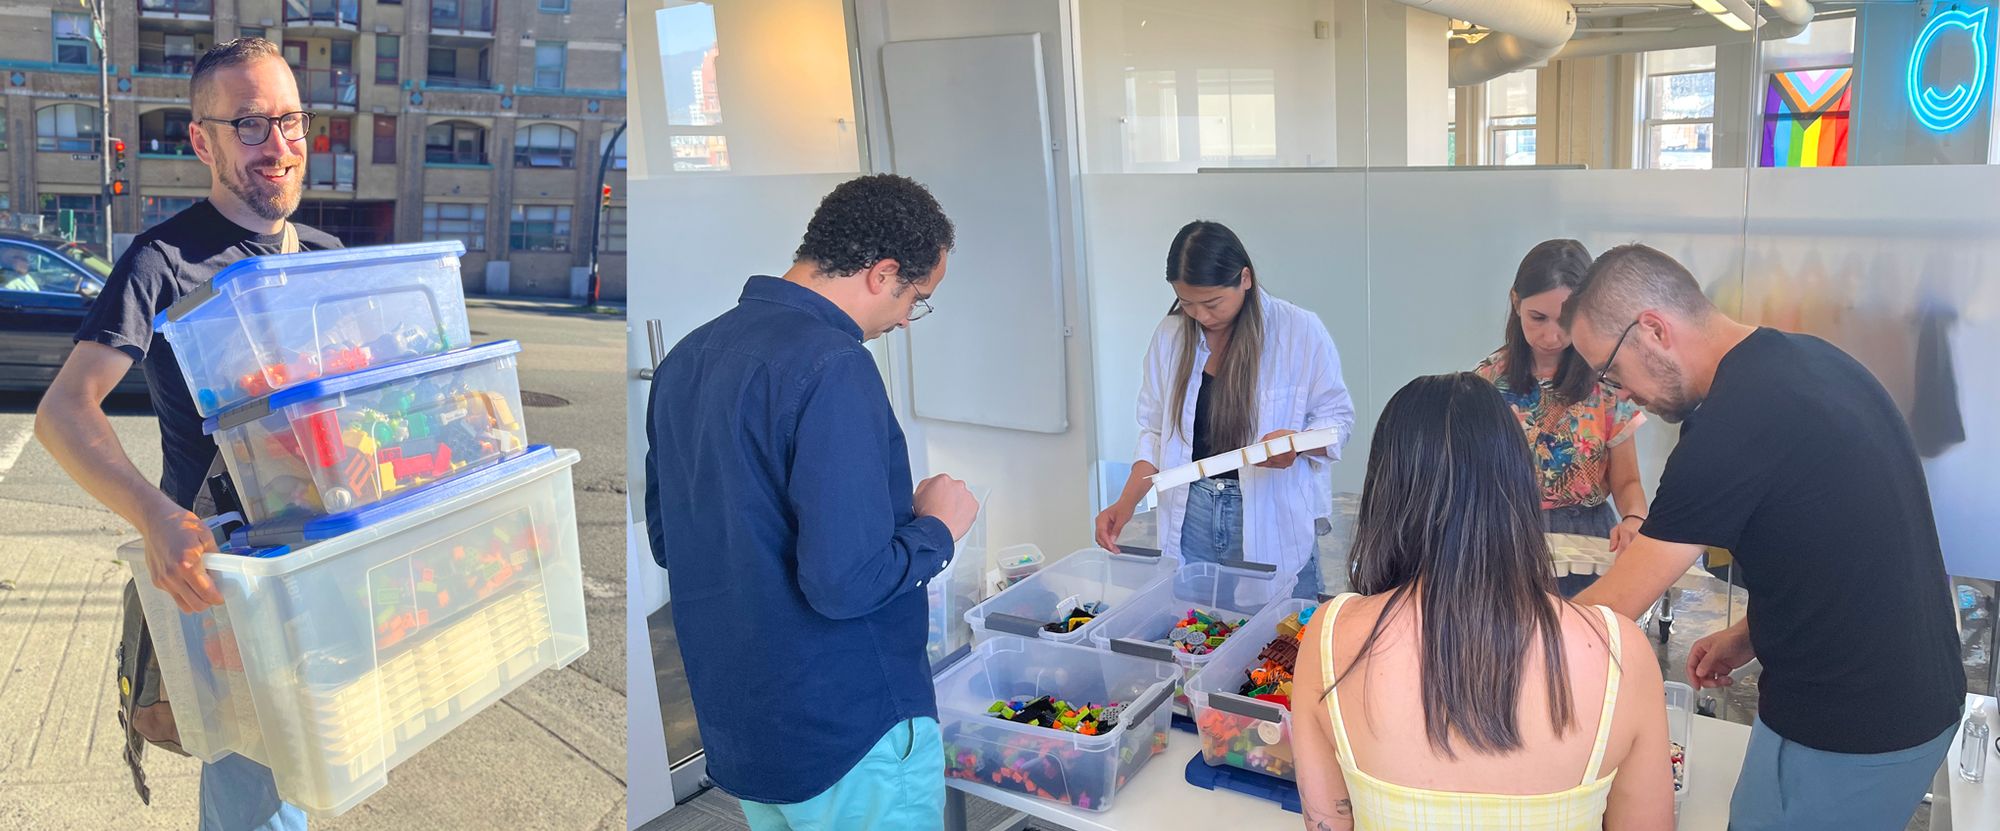 Nick hauling boxes of LEGO bricks on the street out front of the office, and an inset photo of the team all intently gathered around the table of LEGO, picking pieces from the open buckets and assembling their individual models